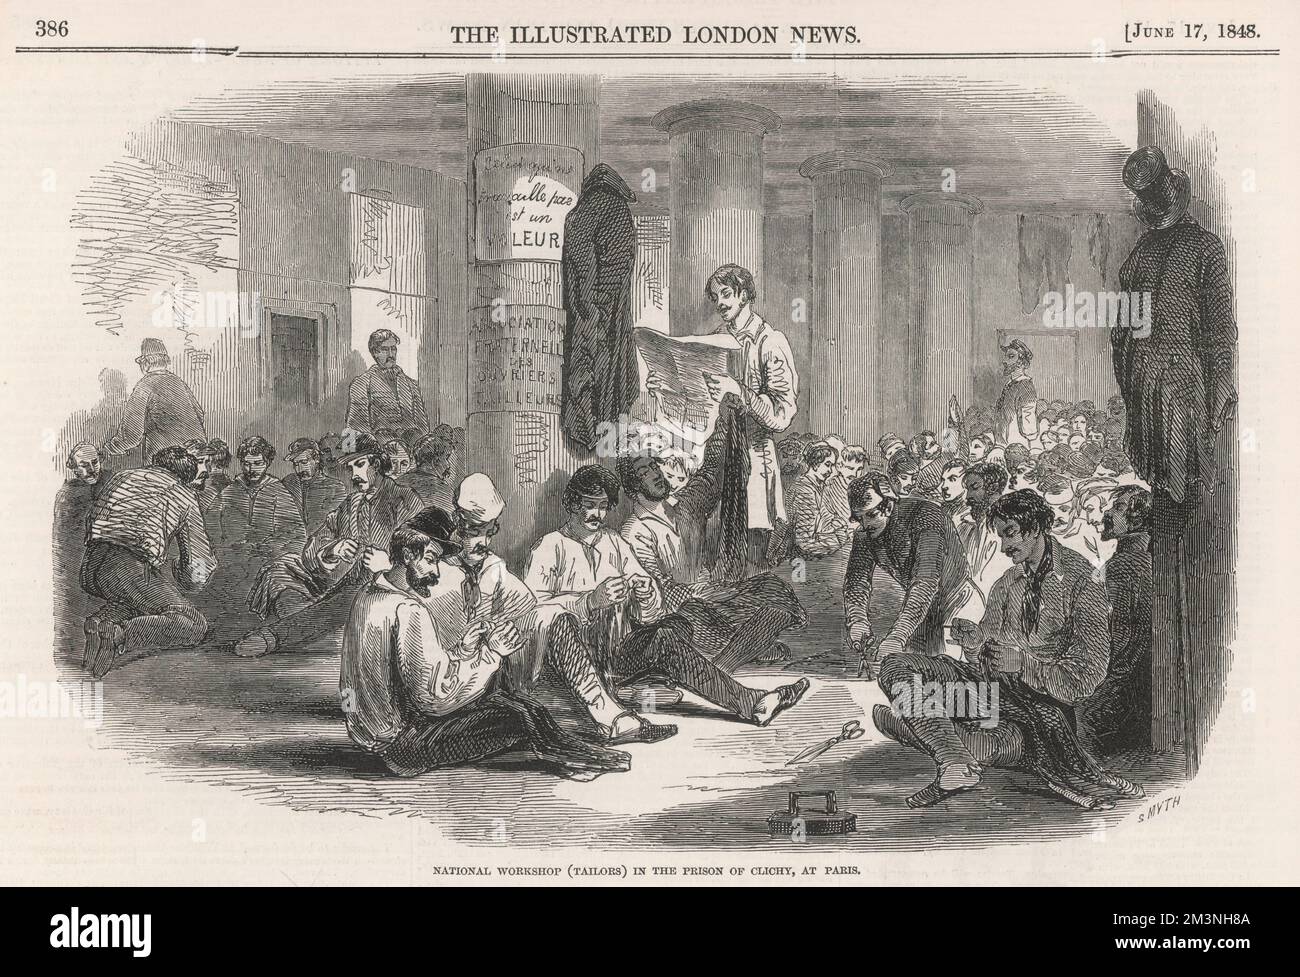 Tailors at work in the debtor's prison of Clichy in Paris, working away while one inmate reads aloud from the newspapers of the day.  On a pillar is a poster reading 'Celui qui ne travaille pas est un voleur' (He who does not work is a rogue).     Date: 1848 Stock Photo